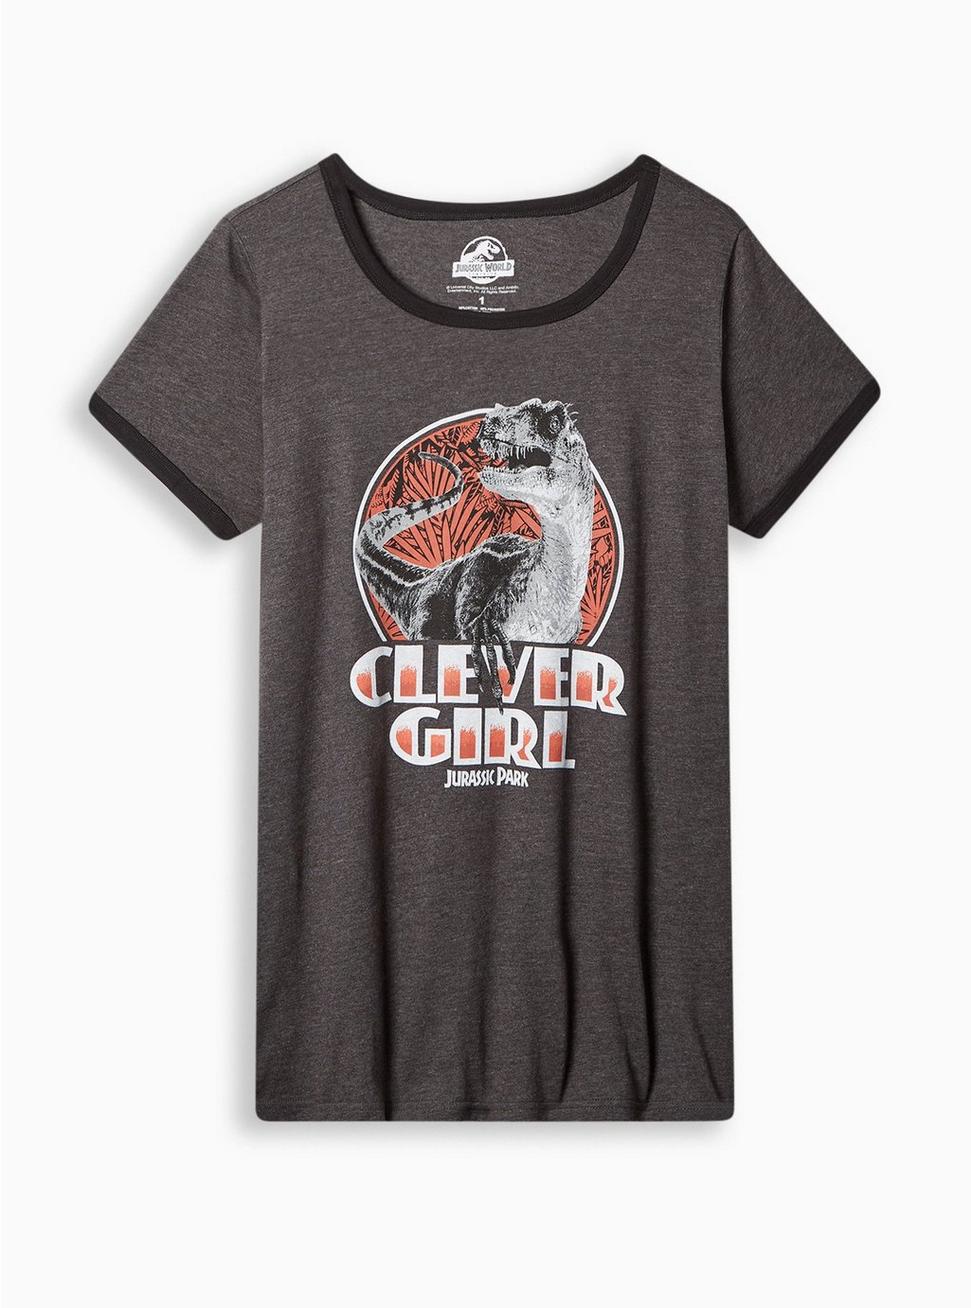 Jurassic Park Clever Girl Classic Fit Cotton Ringer Tee, CHARCOAL HEATHER, hi-res